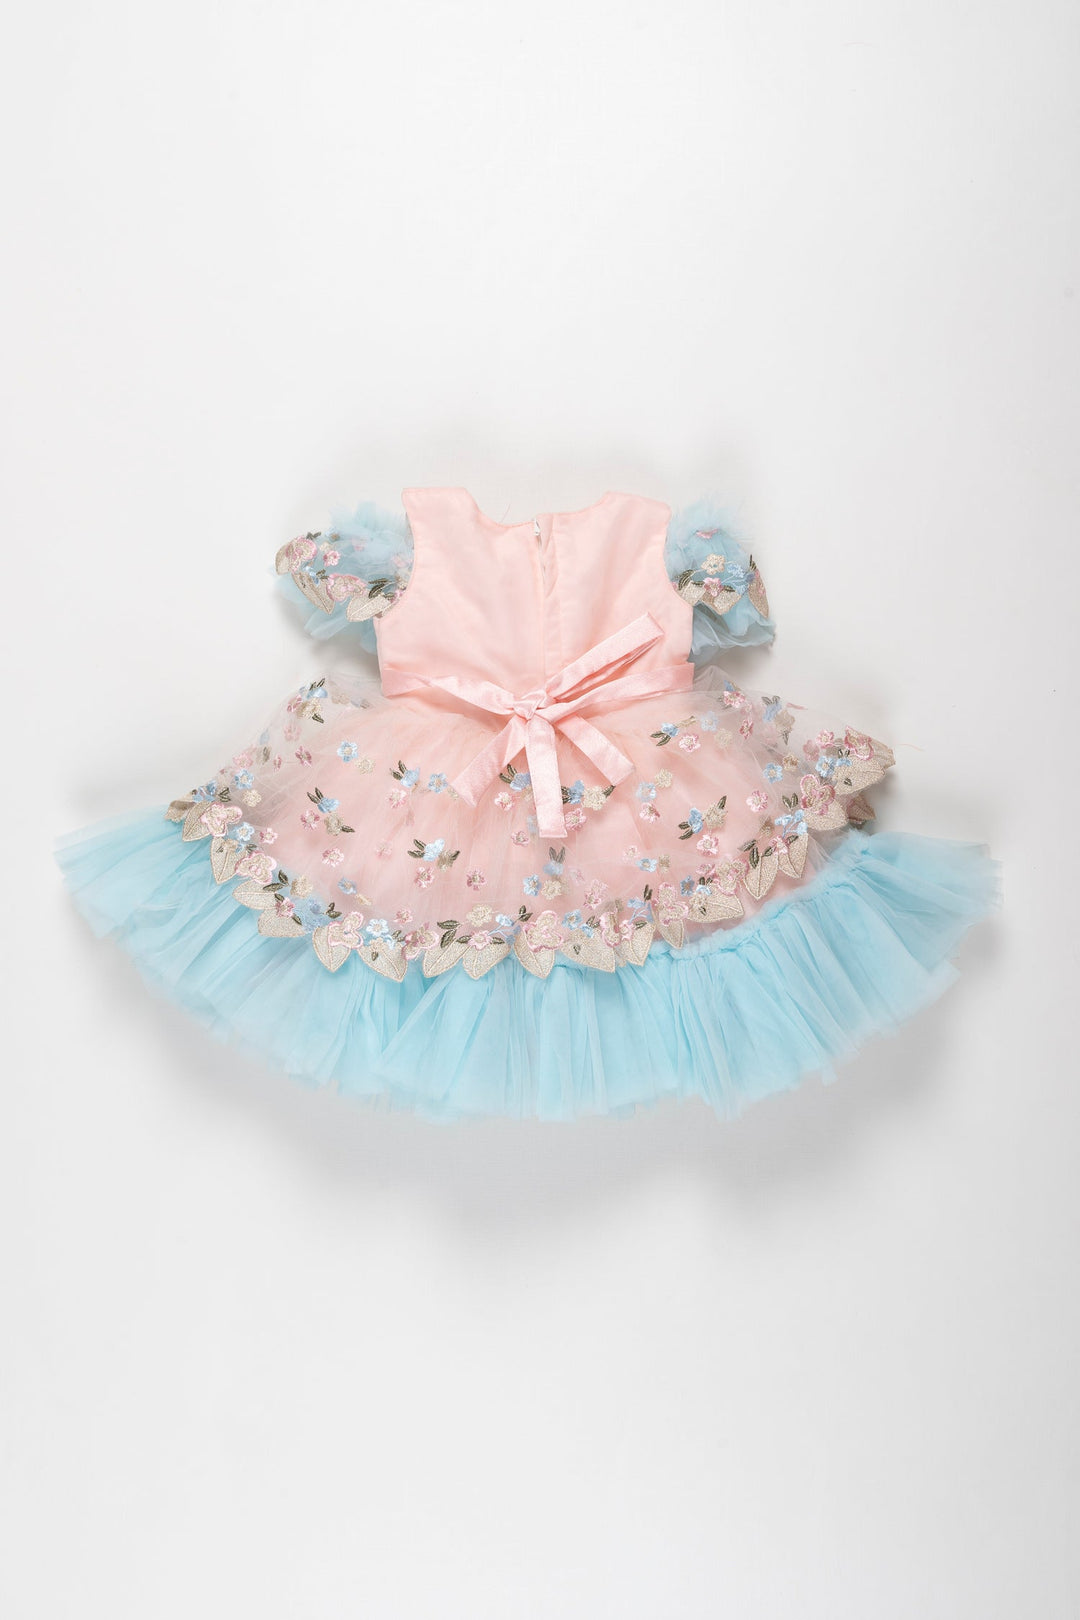 The Nesavu Girls Tutu Frock Blossom Fairy: Girls Pastel Tulle Party Frock with Floral Embellishments Nesavu Shop the Blossom Fairy Tulle Party Dress for Girls | A Pastel Dream | The Nesavu